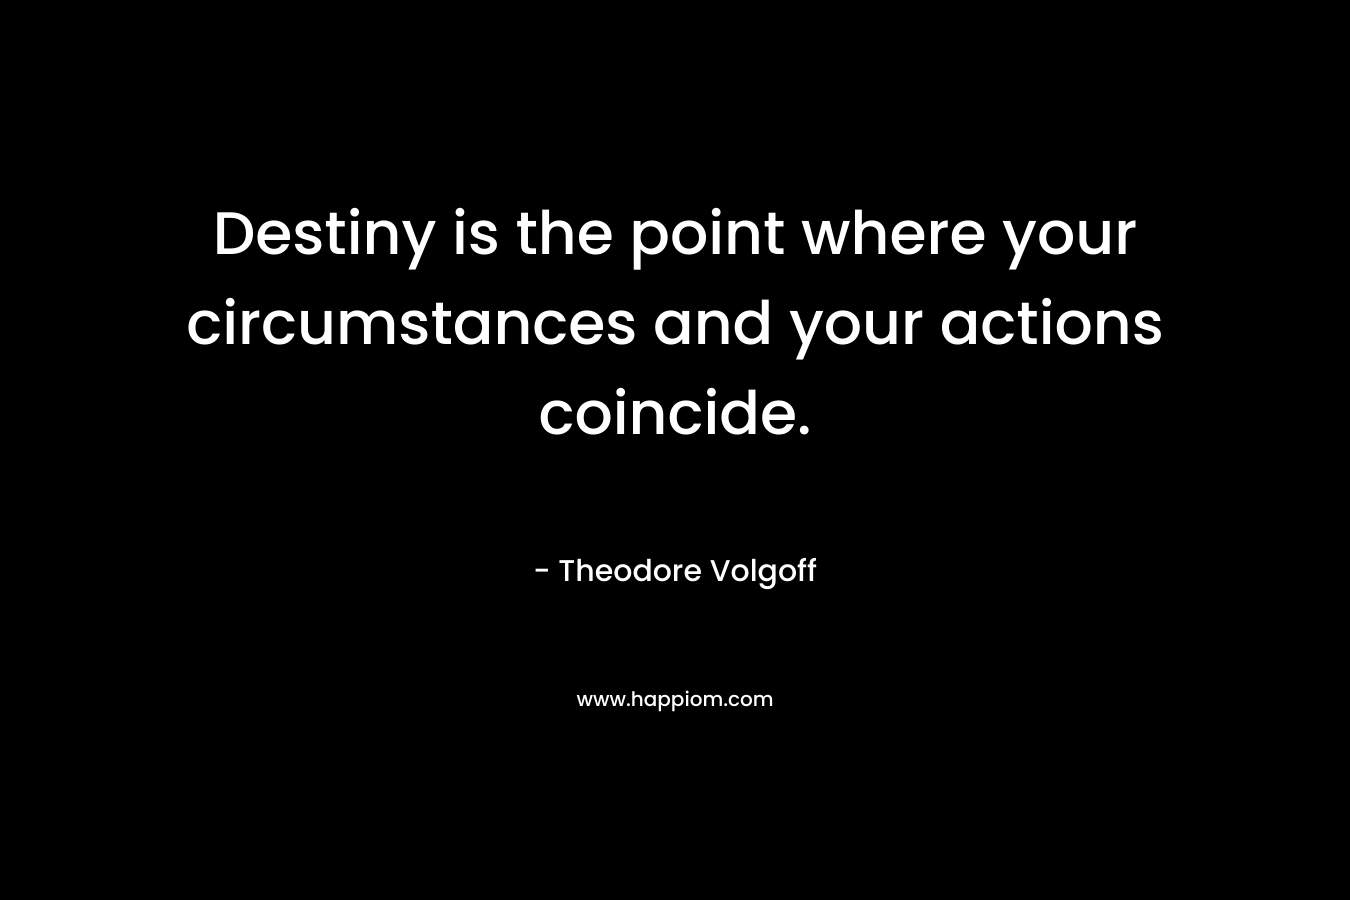 Destiny is the point where your circumstances and your actions coincide. – Theodore Volgoff